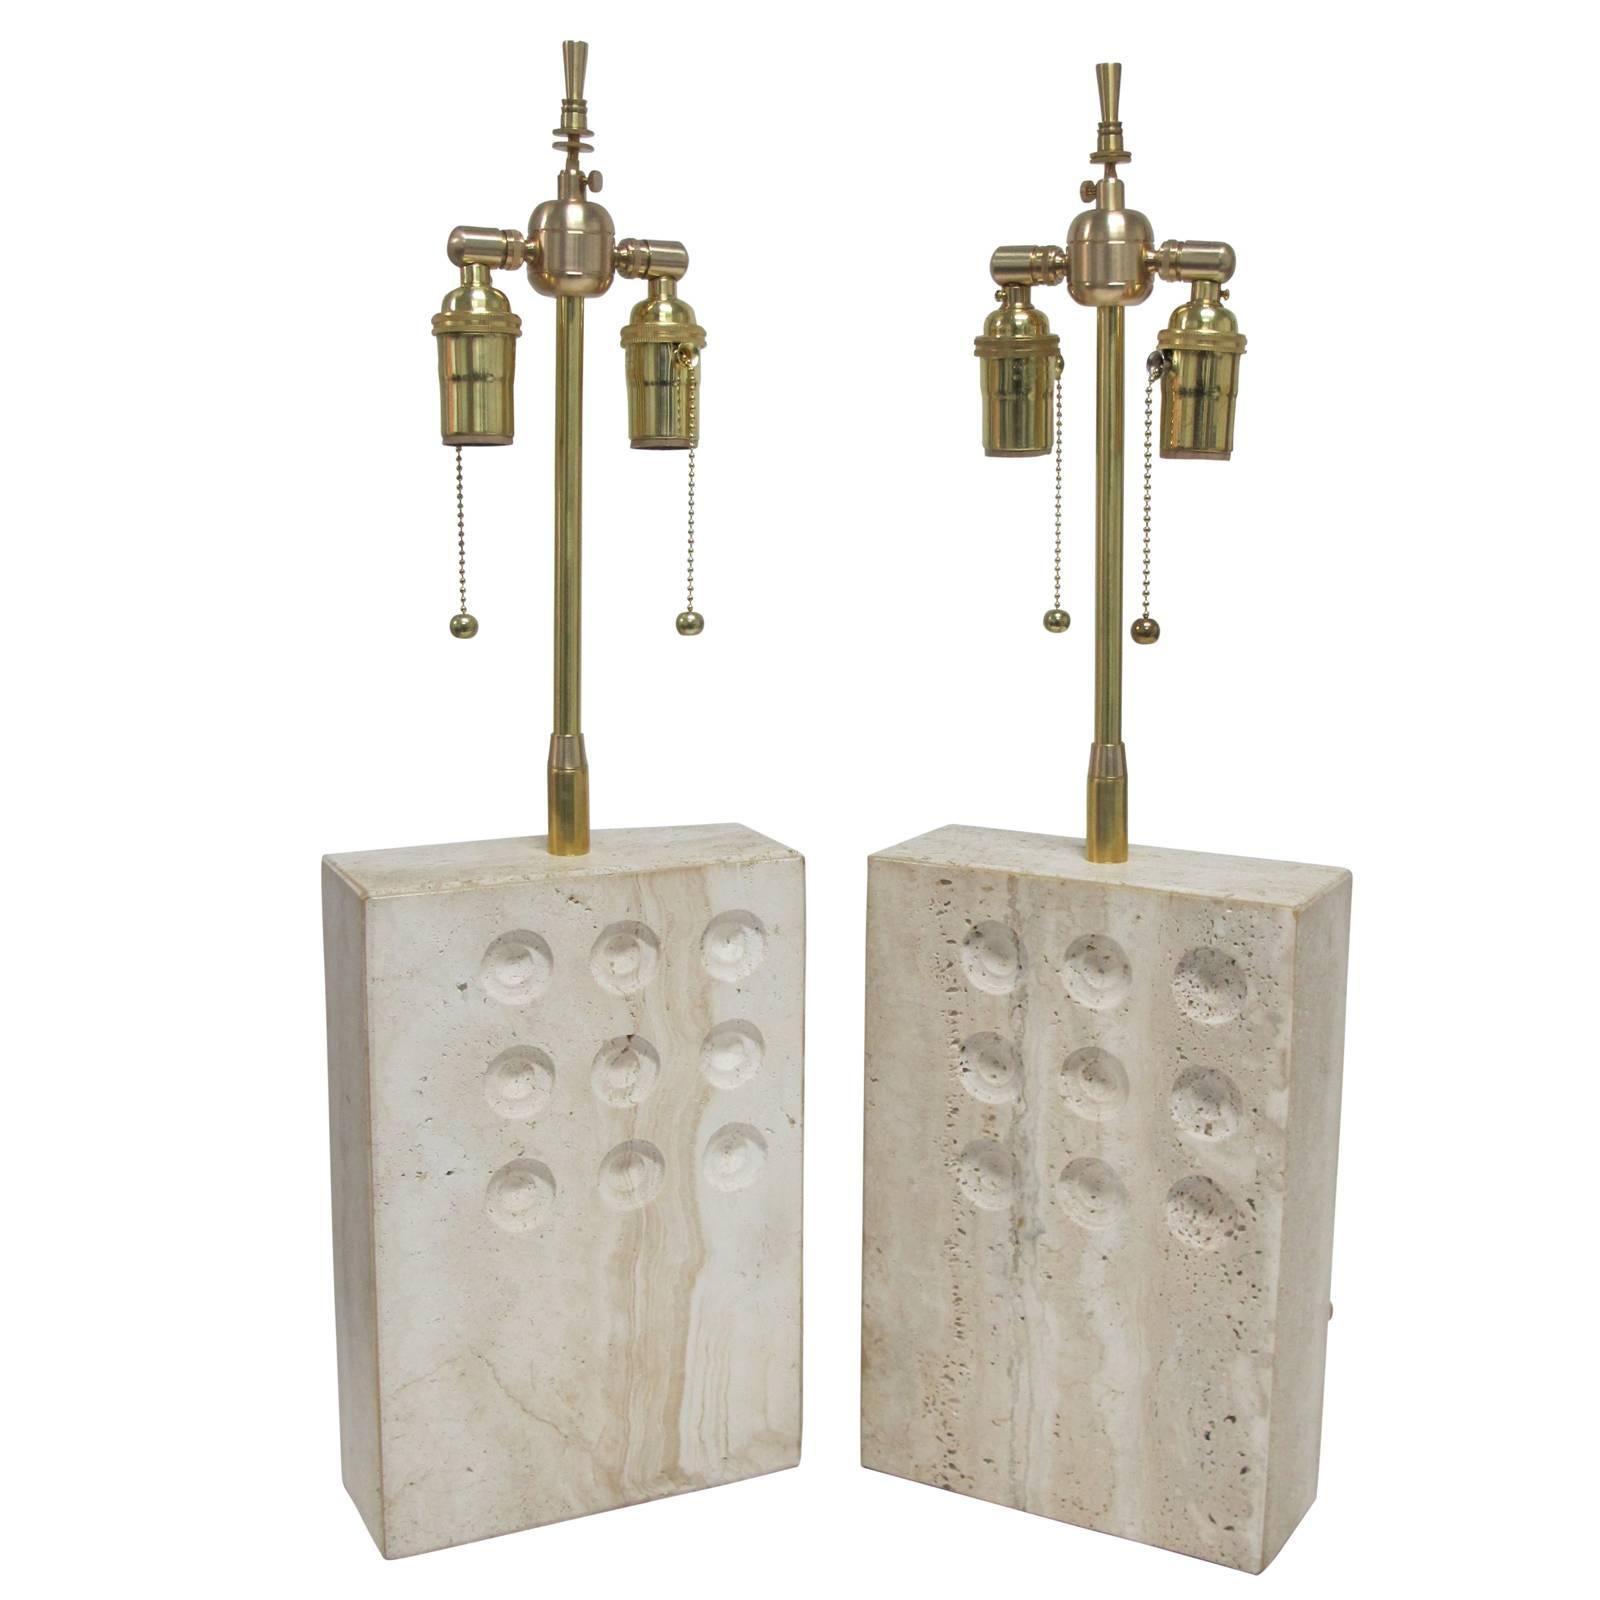 Pair of Rectangular Travertine Table Lamps with Circular Impressions by Raymor